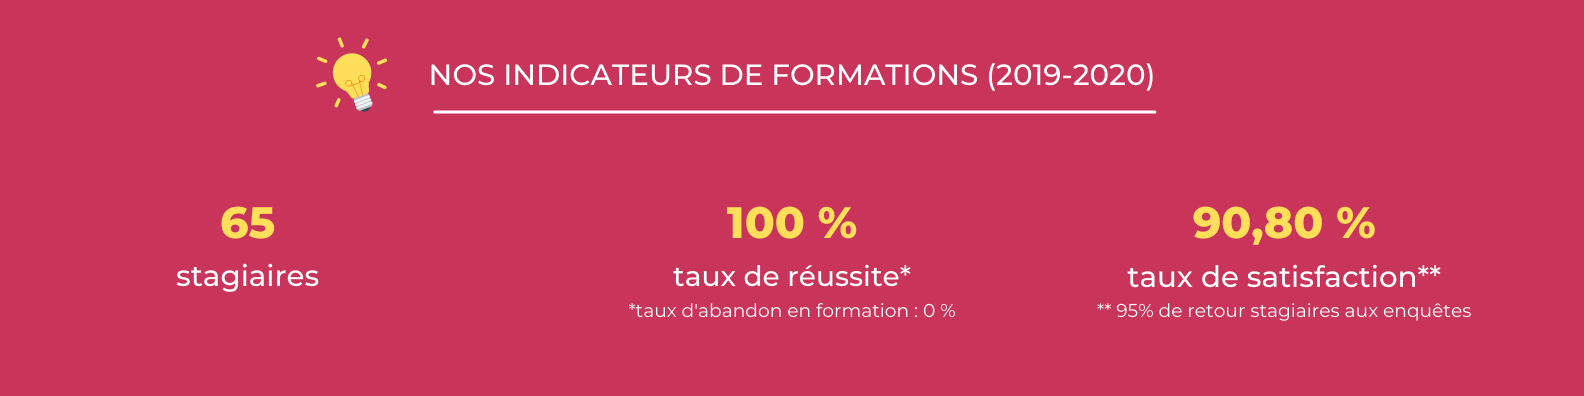 Formations - indicateurs